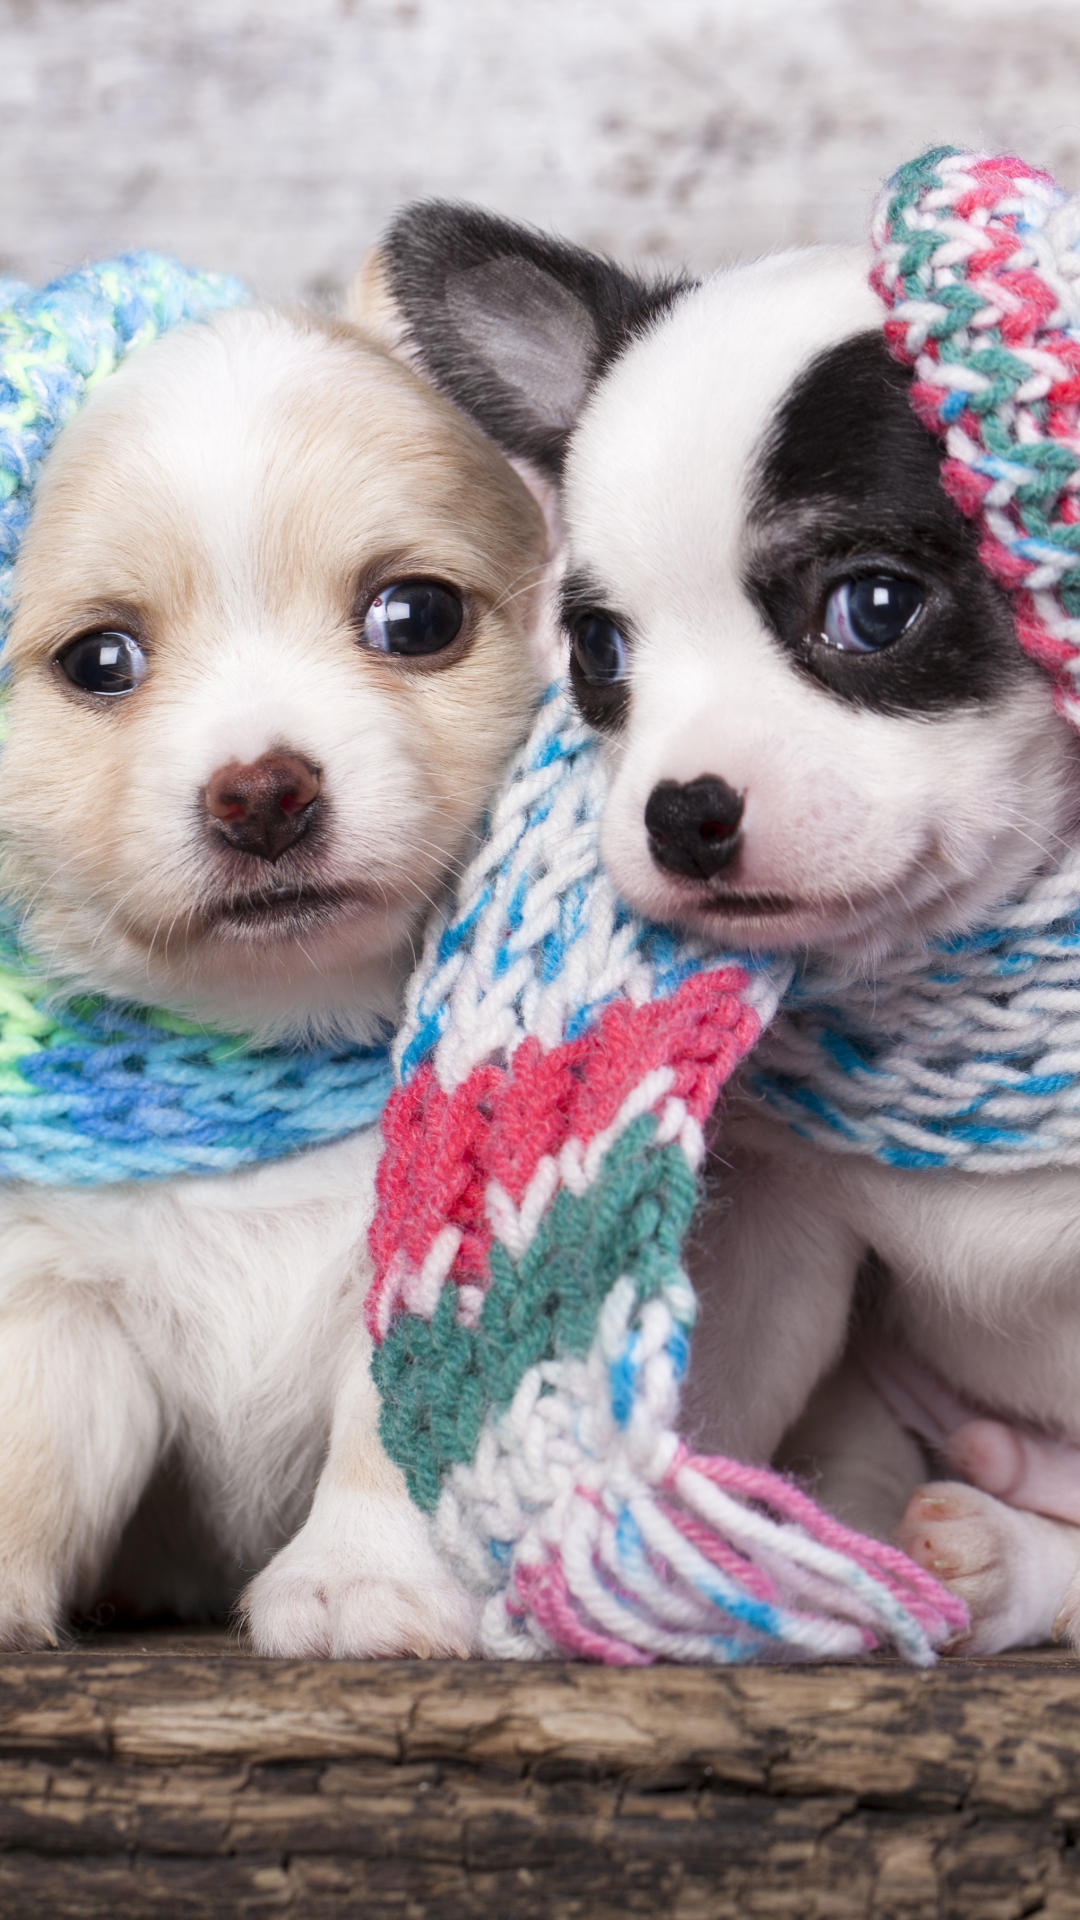 Cute Scarf Puppy Dog Couple iPhone 6 Wallpaper Download | iPhone ...